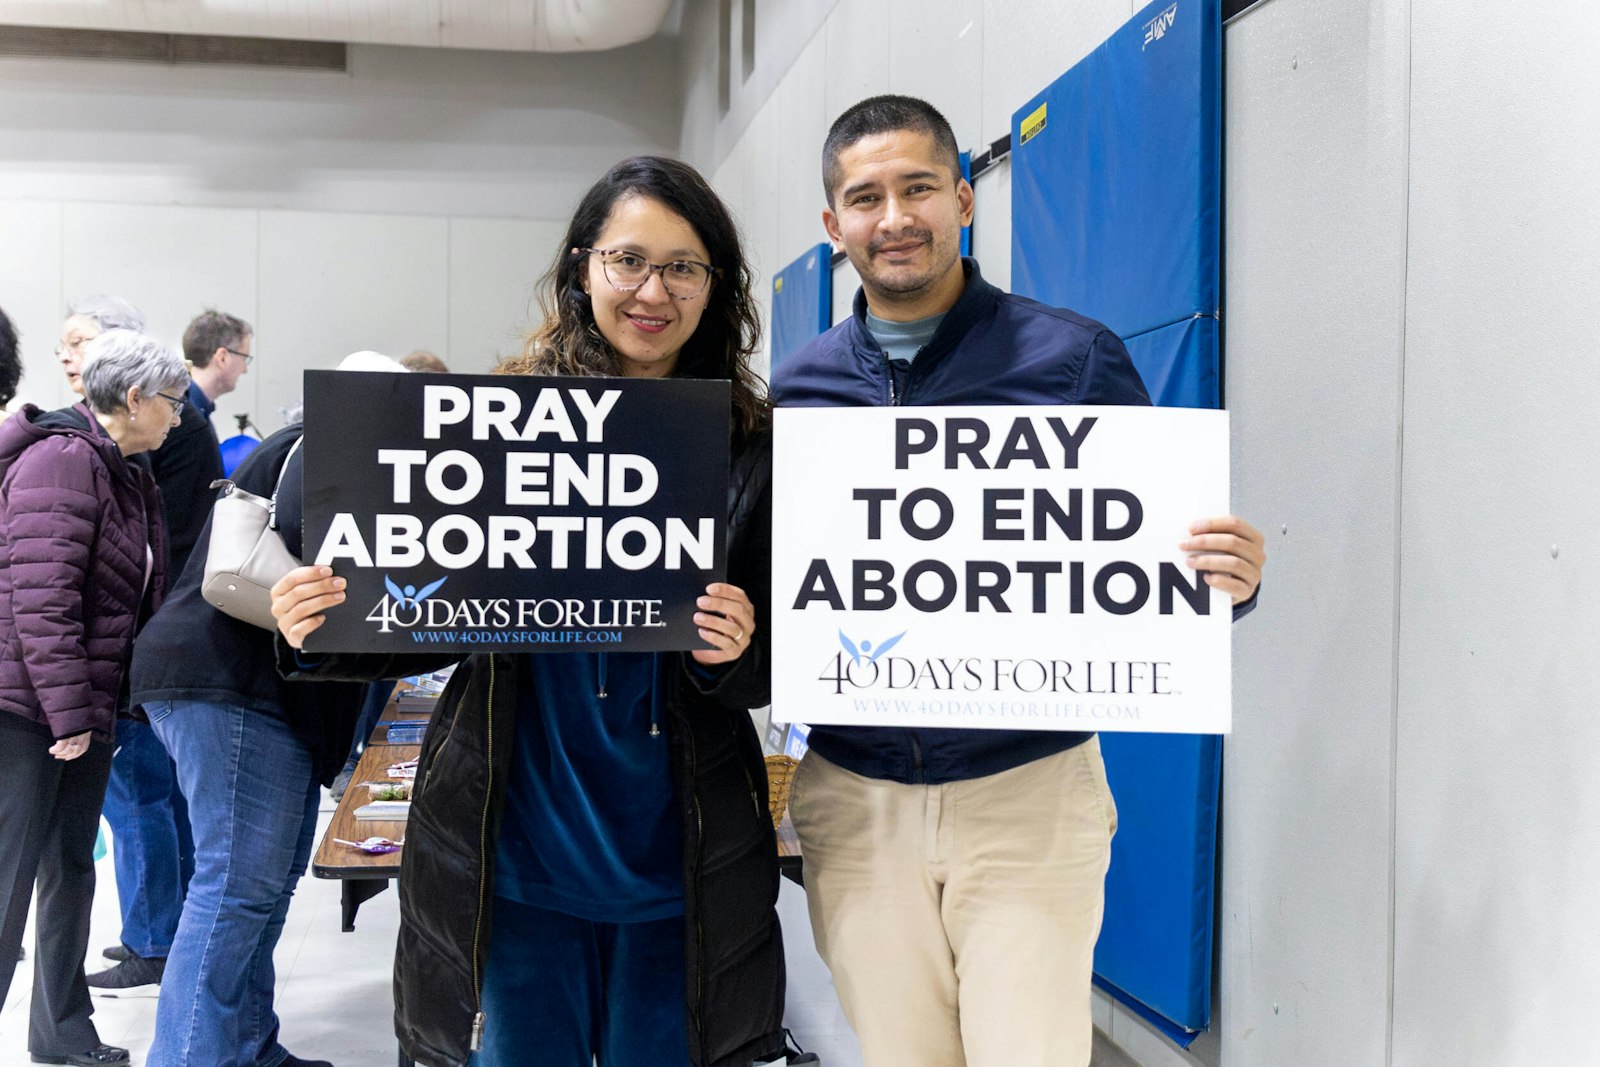 Volunteers hold signs used during the peaceful prayer vigil as part of the 40 Days for Life campaign in Ferndale. Volunteers can sign up for timeslots to participate in prayerful, silent witness.